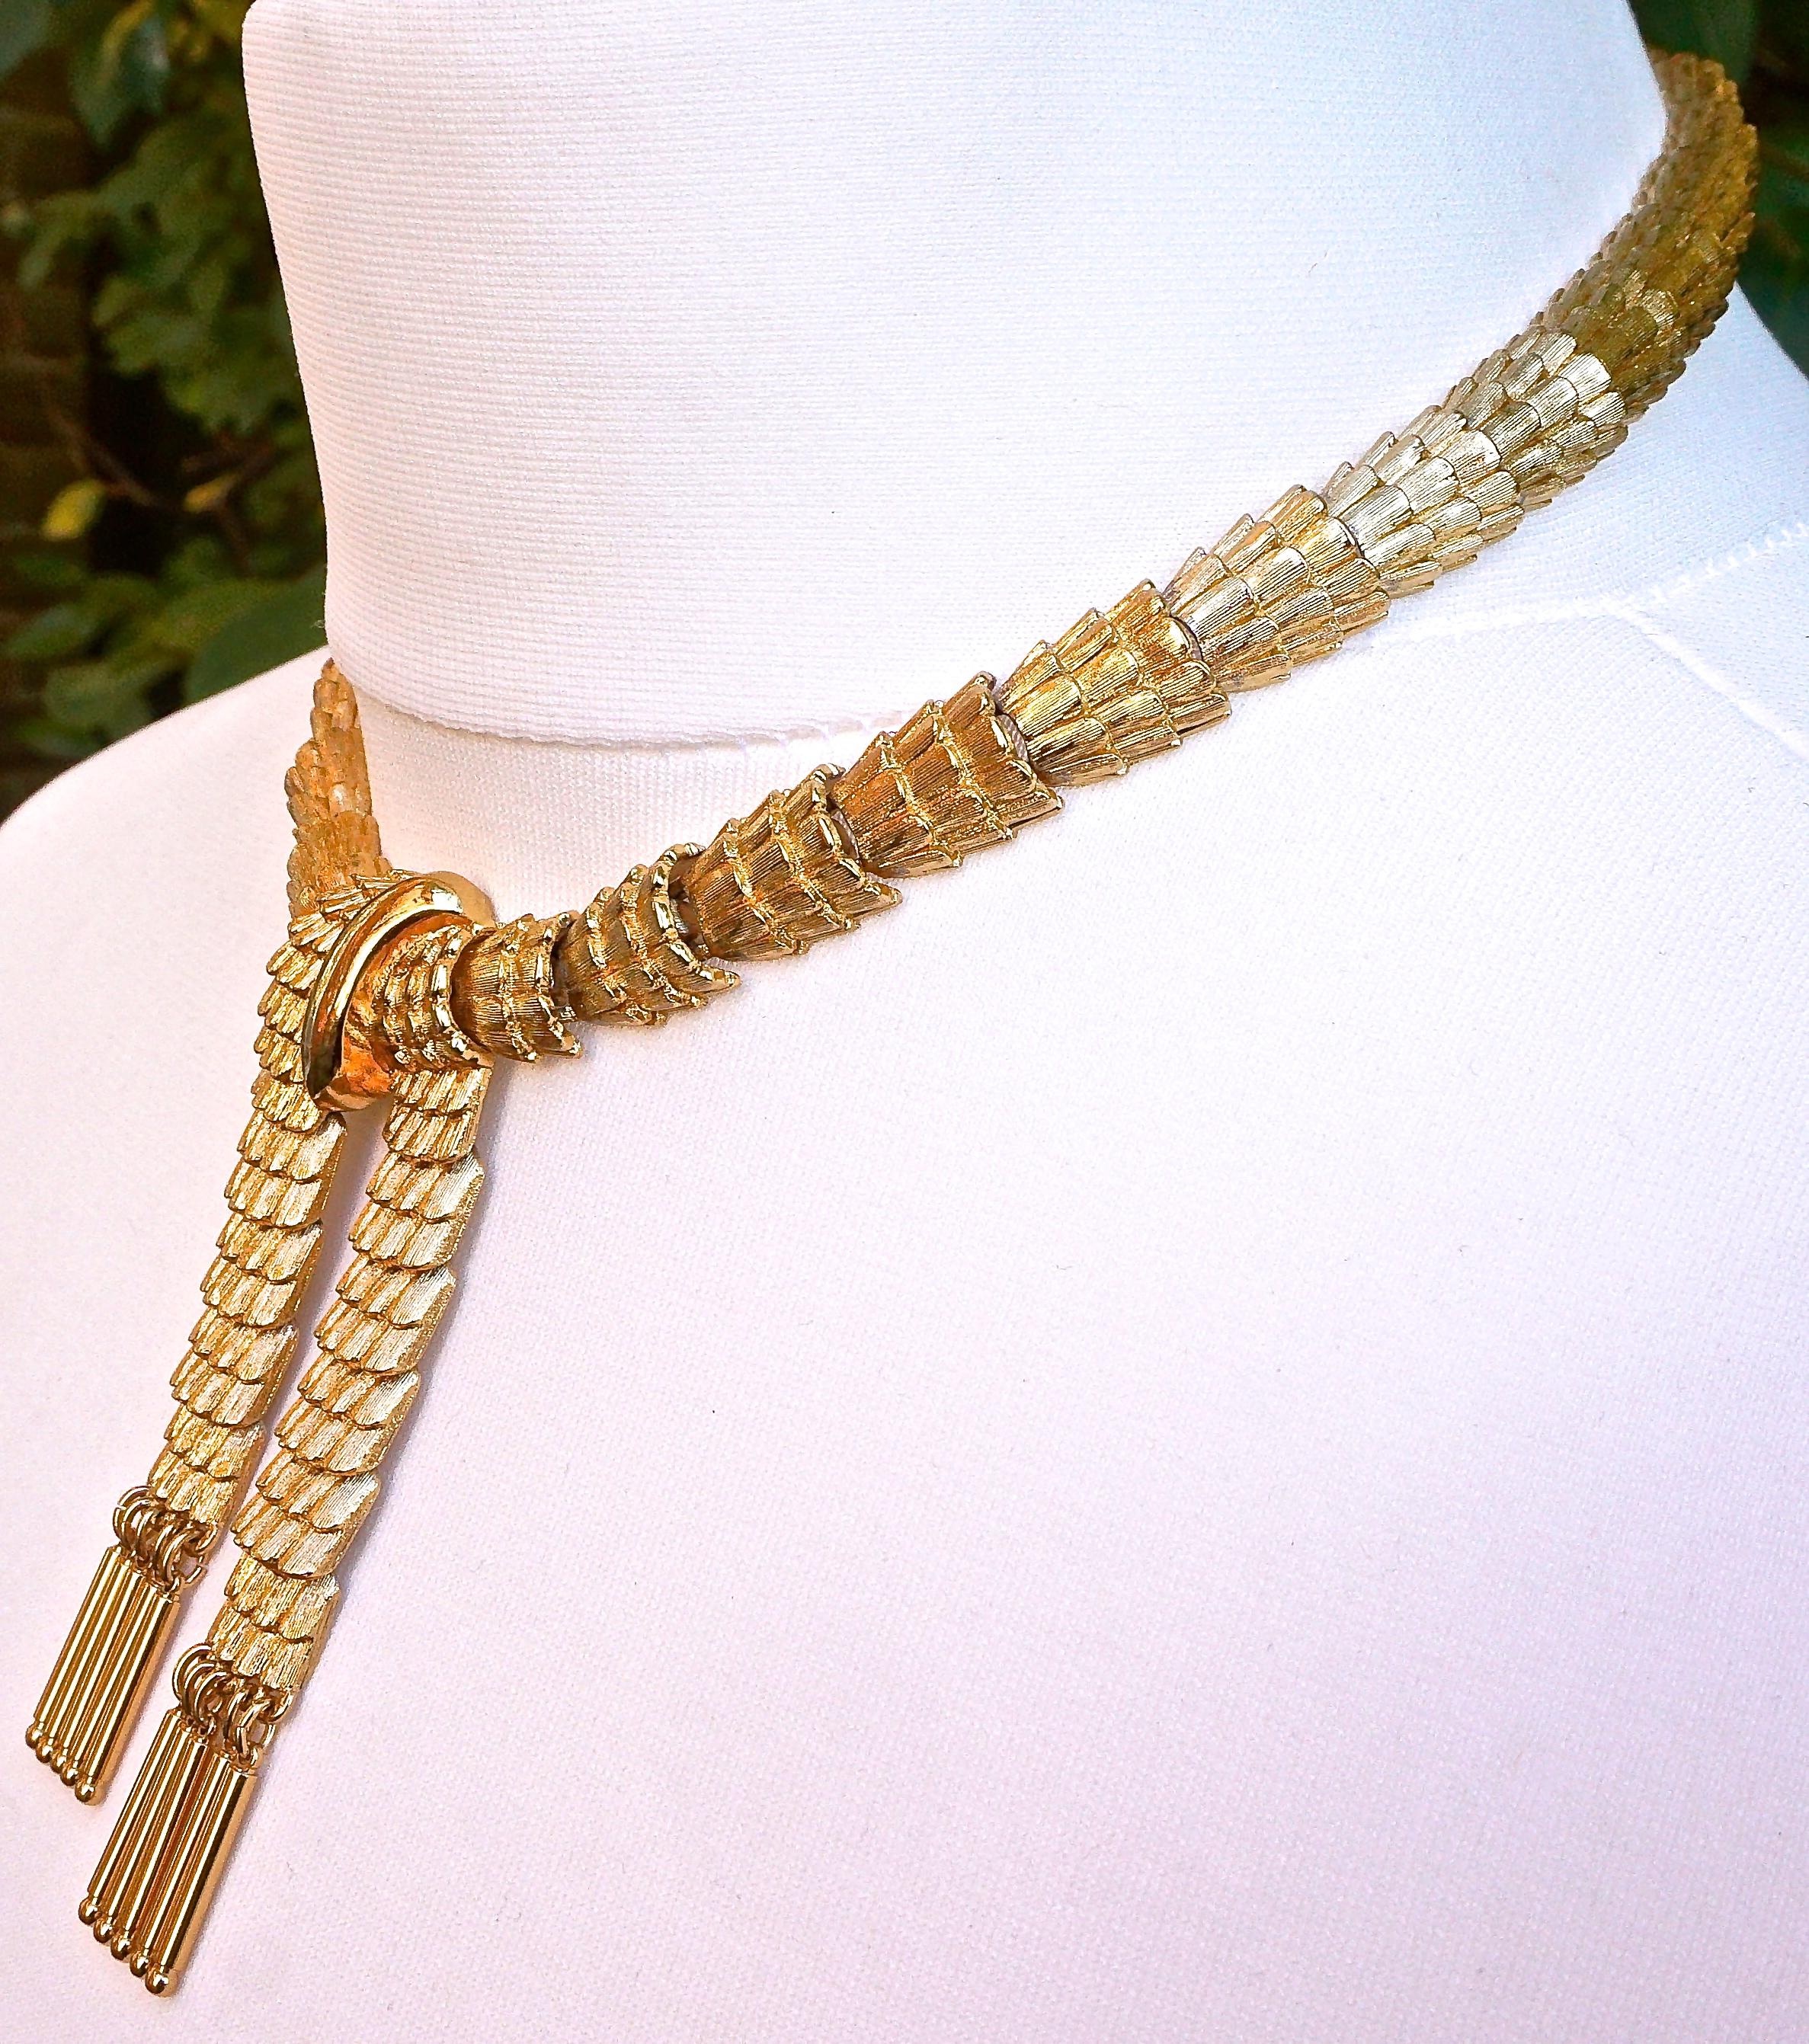 Women's Monet Gold Plated Textured Link Ribbon Collar Necklace, circa 1950s